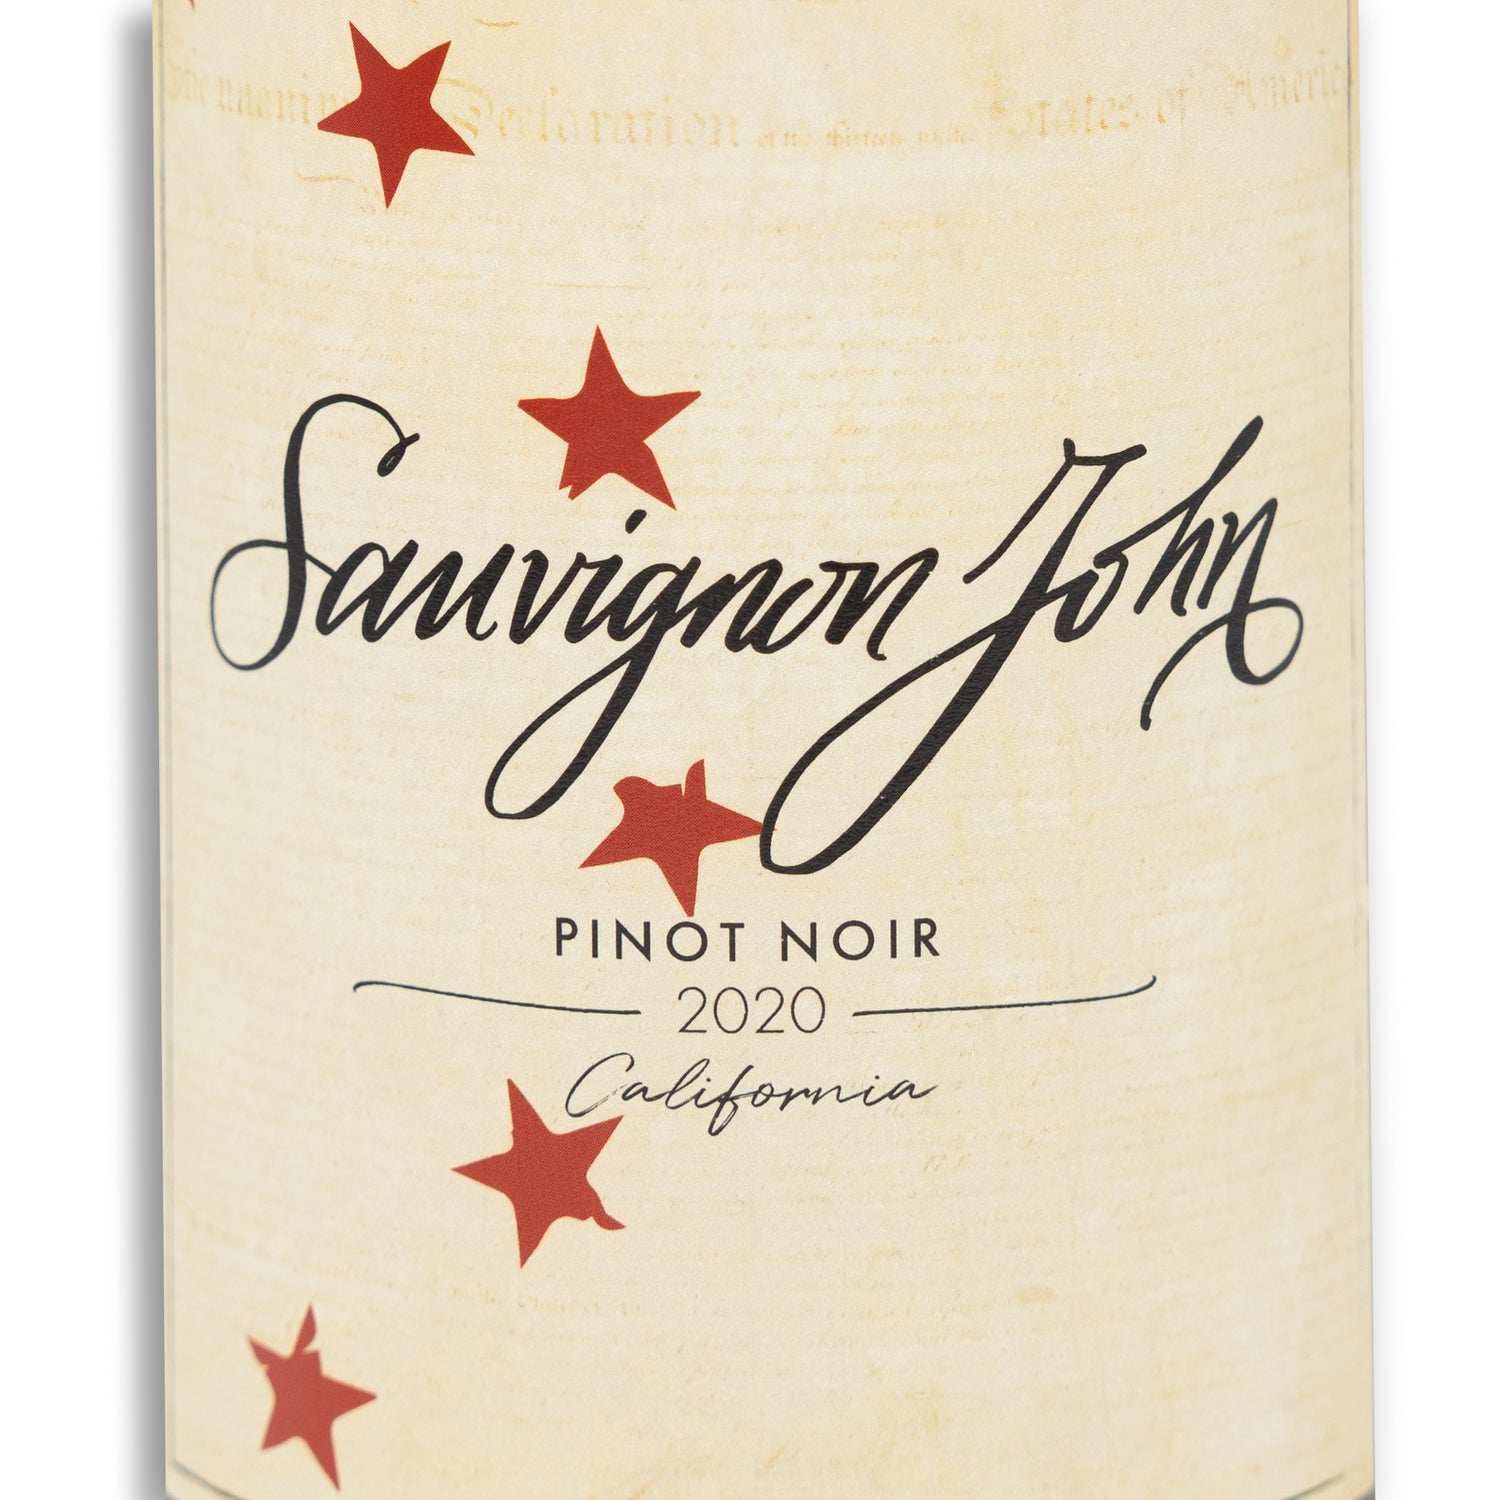 Instore Pickup Or Local Delivery Only: Sauvignon John Pinot Noir Red W